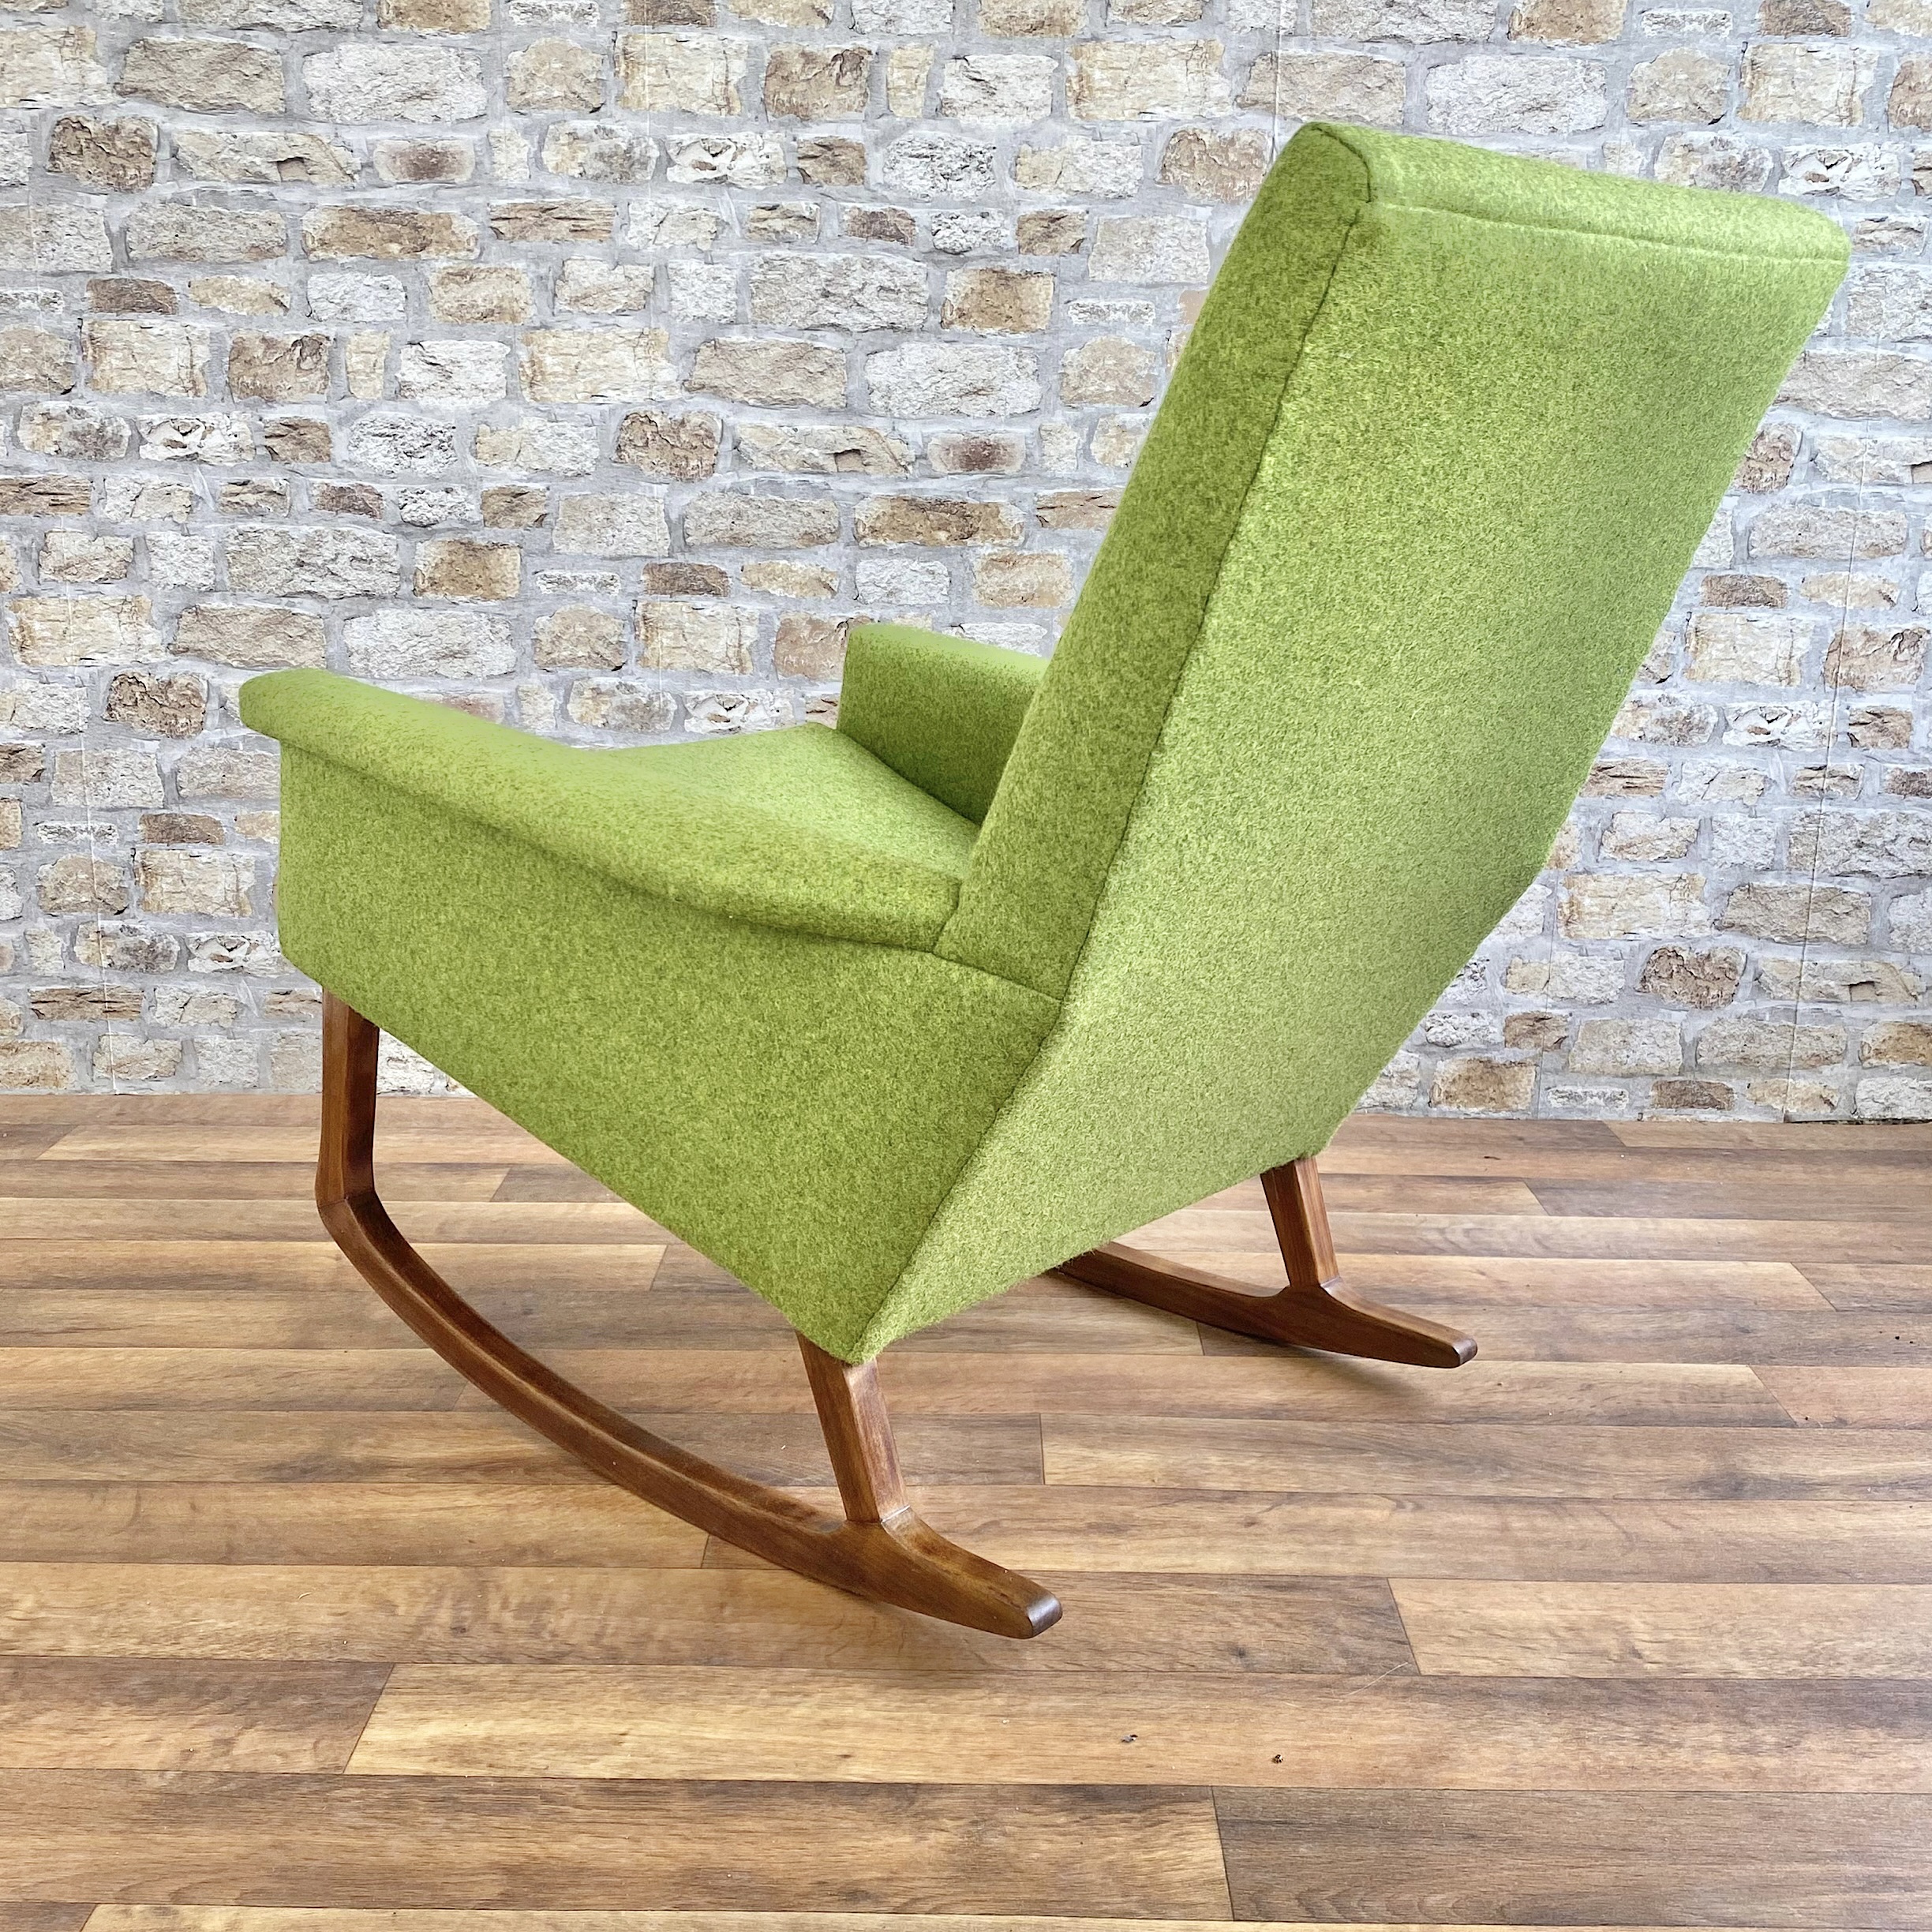 Afromosia Mid Century Rocking Chair